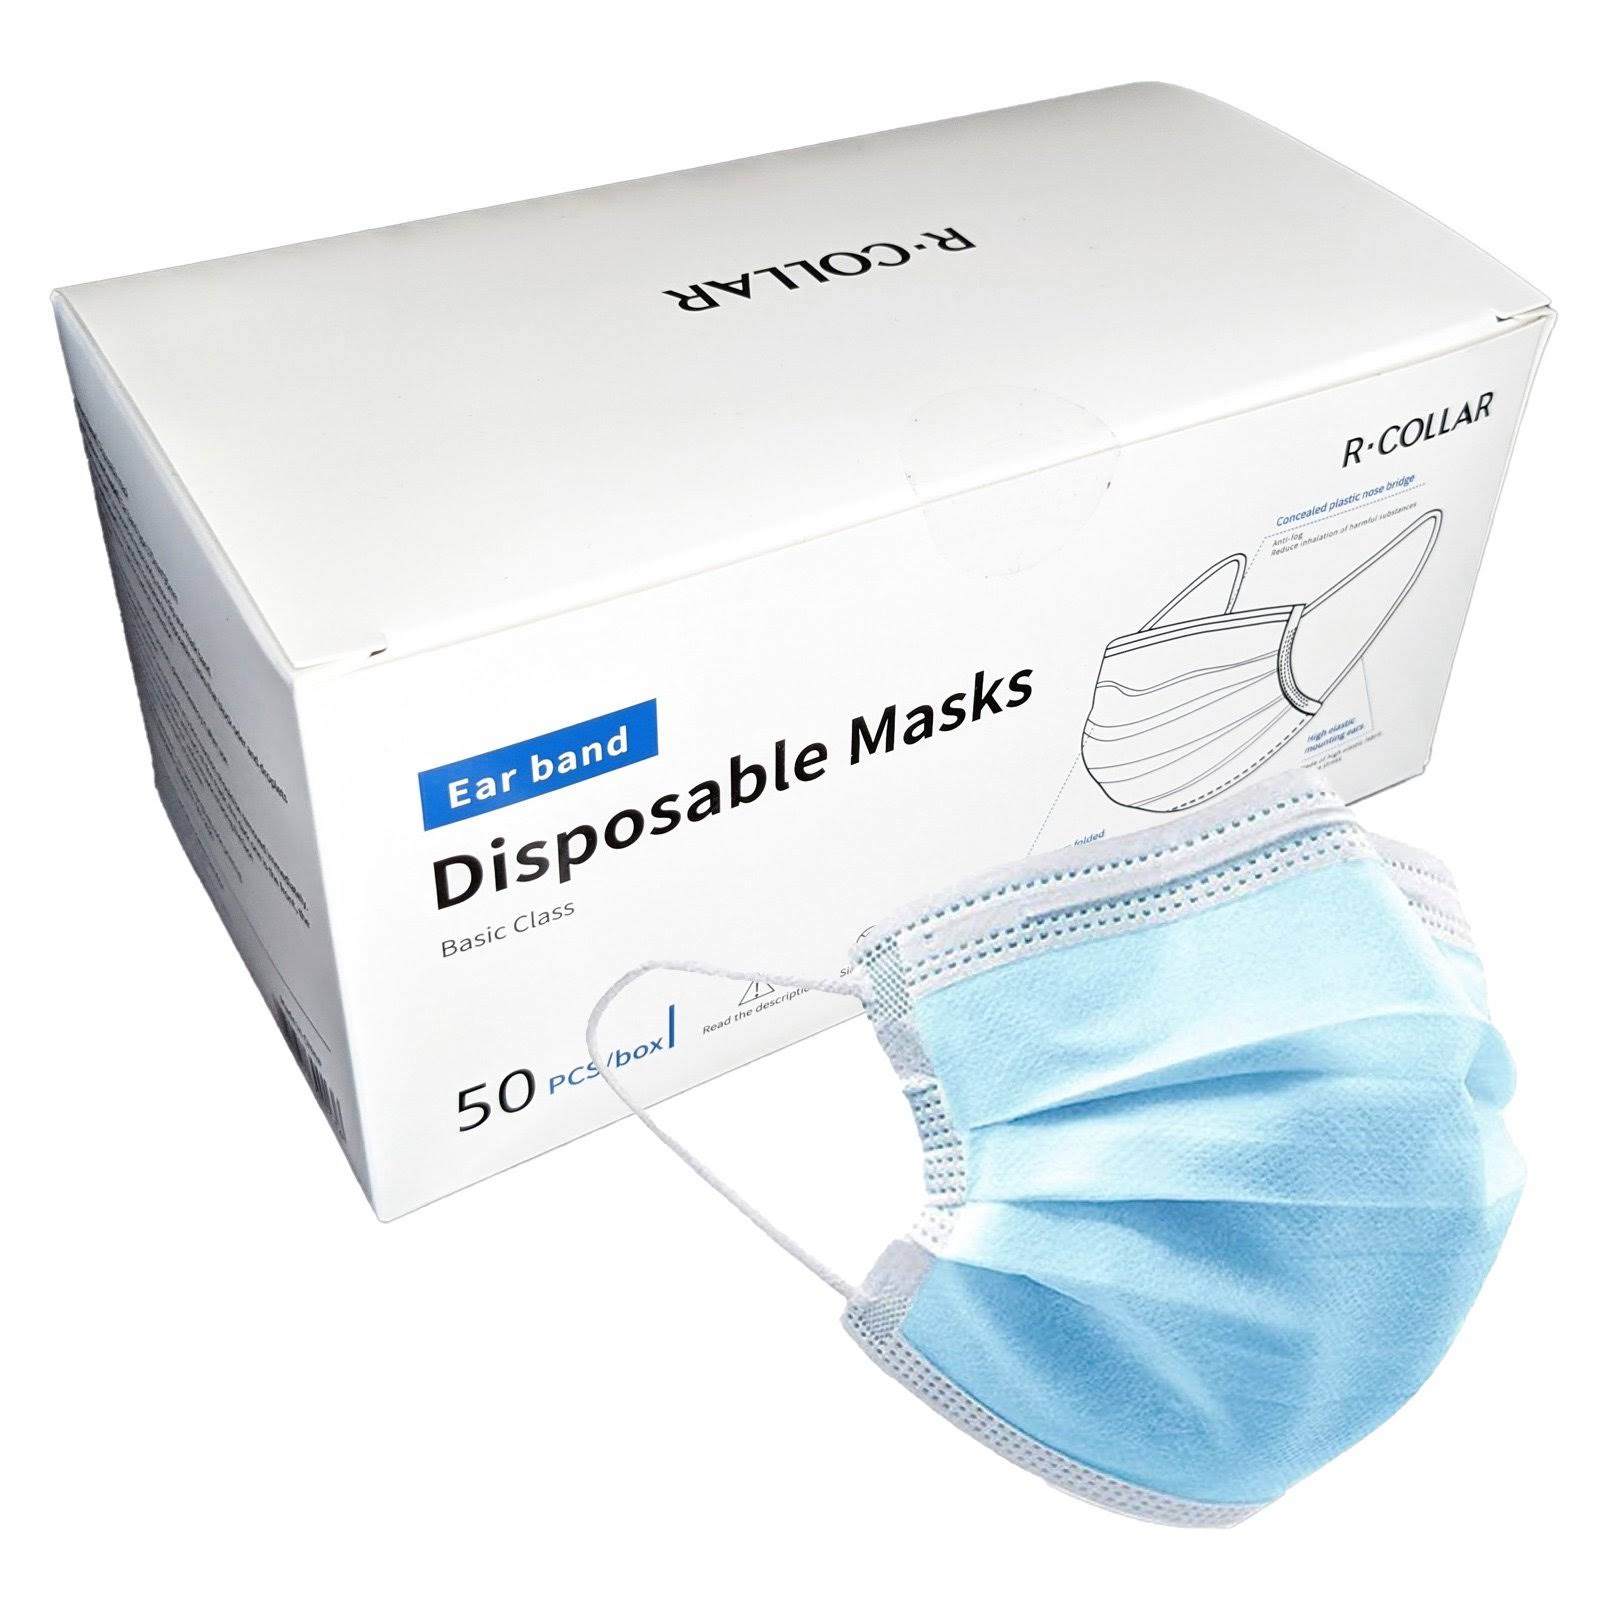 R-Collar Disposable Face Mask, Pack of 50